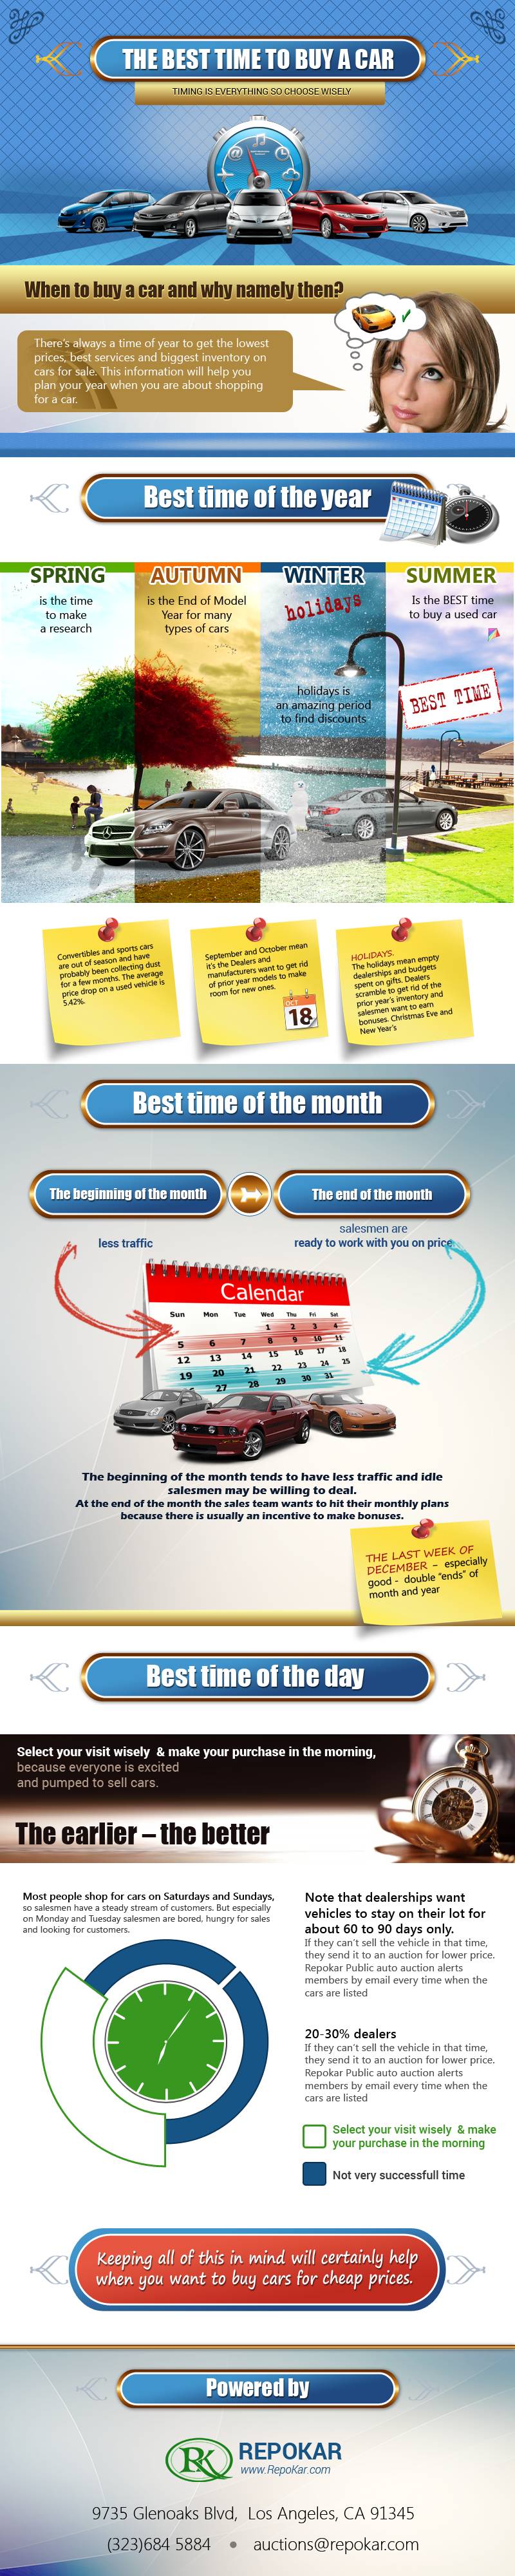 best time to buy car